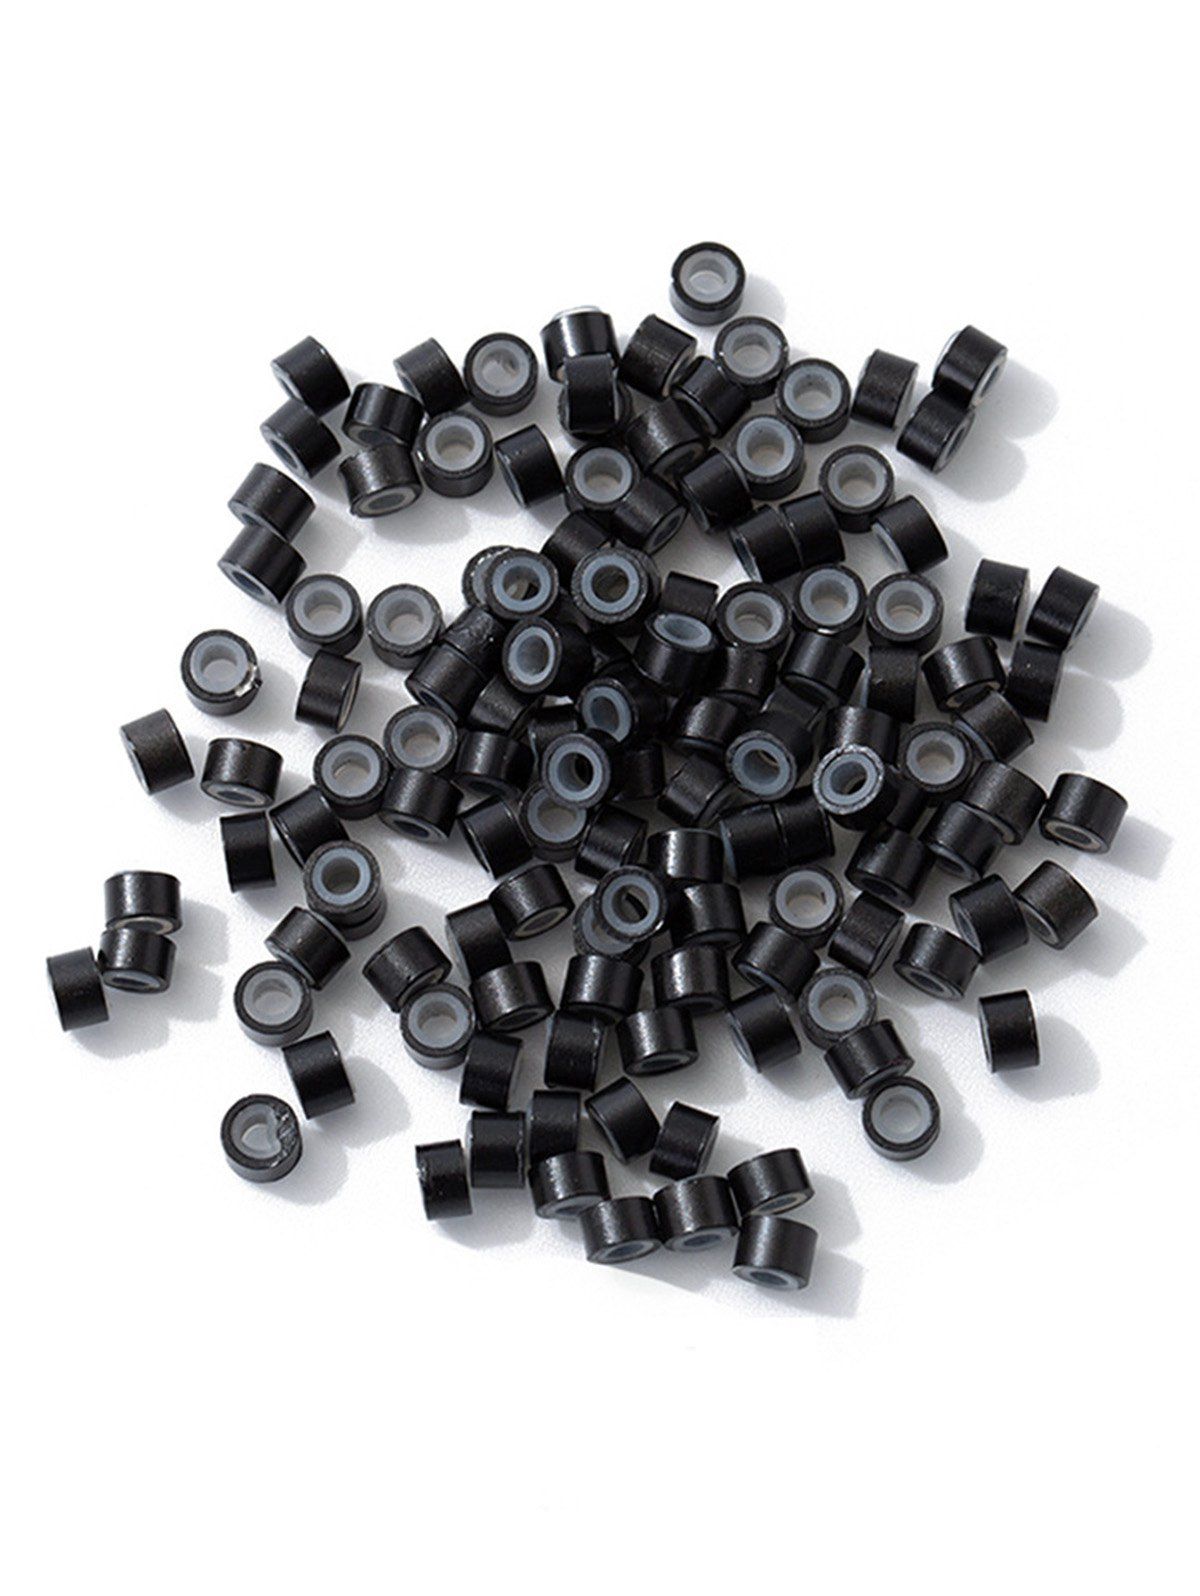 1000Pcs Silicone Hair Extension Wig Link Ring Beads - BLACK 